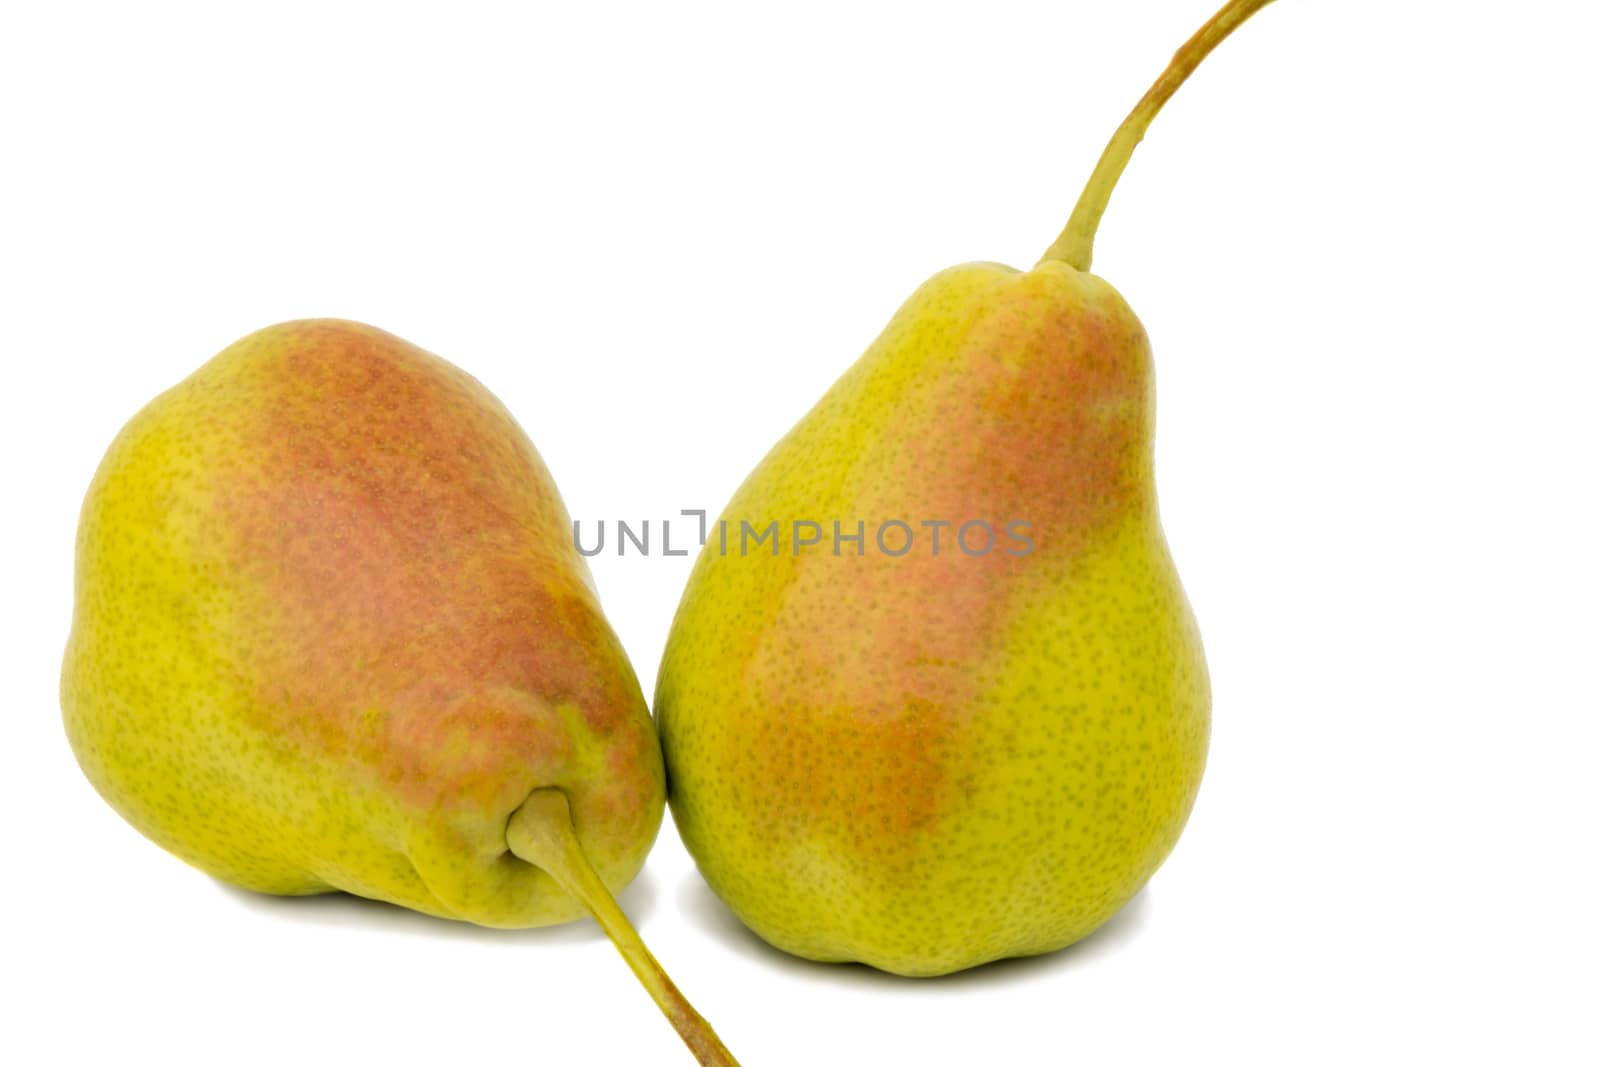 Two ripe large yellow pears. Presented on a white background.